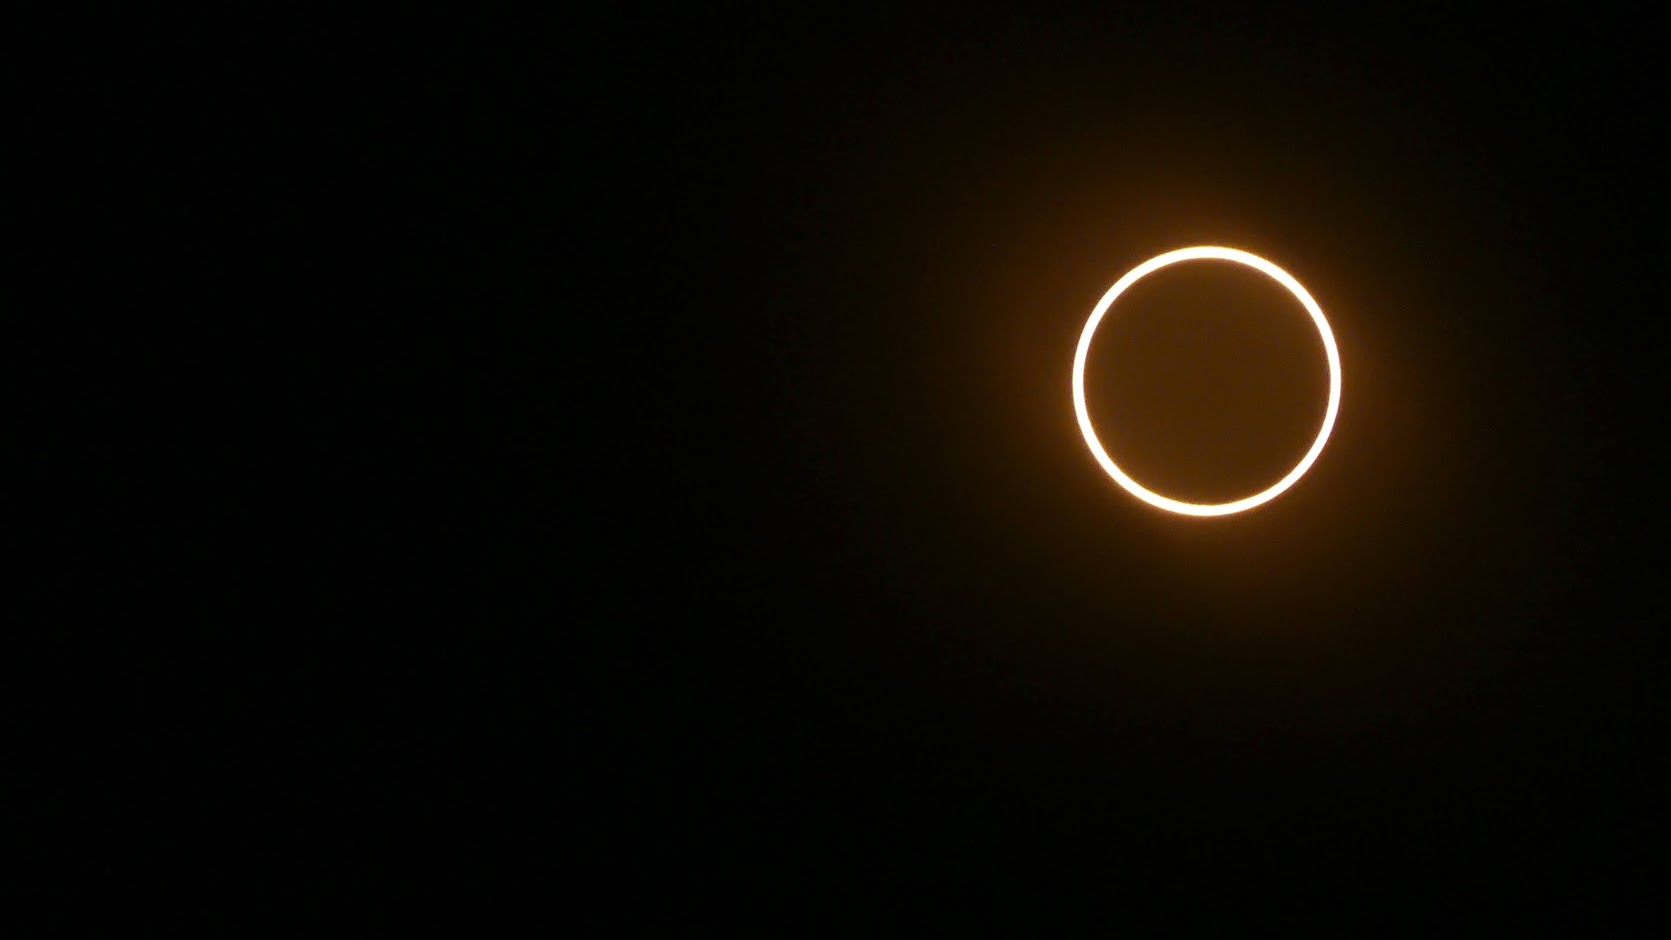 A dark background with the golden ring of an annular eclipse in the upper right corner. (Taken with a filter on a camera.)